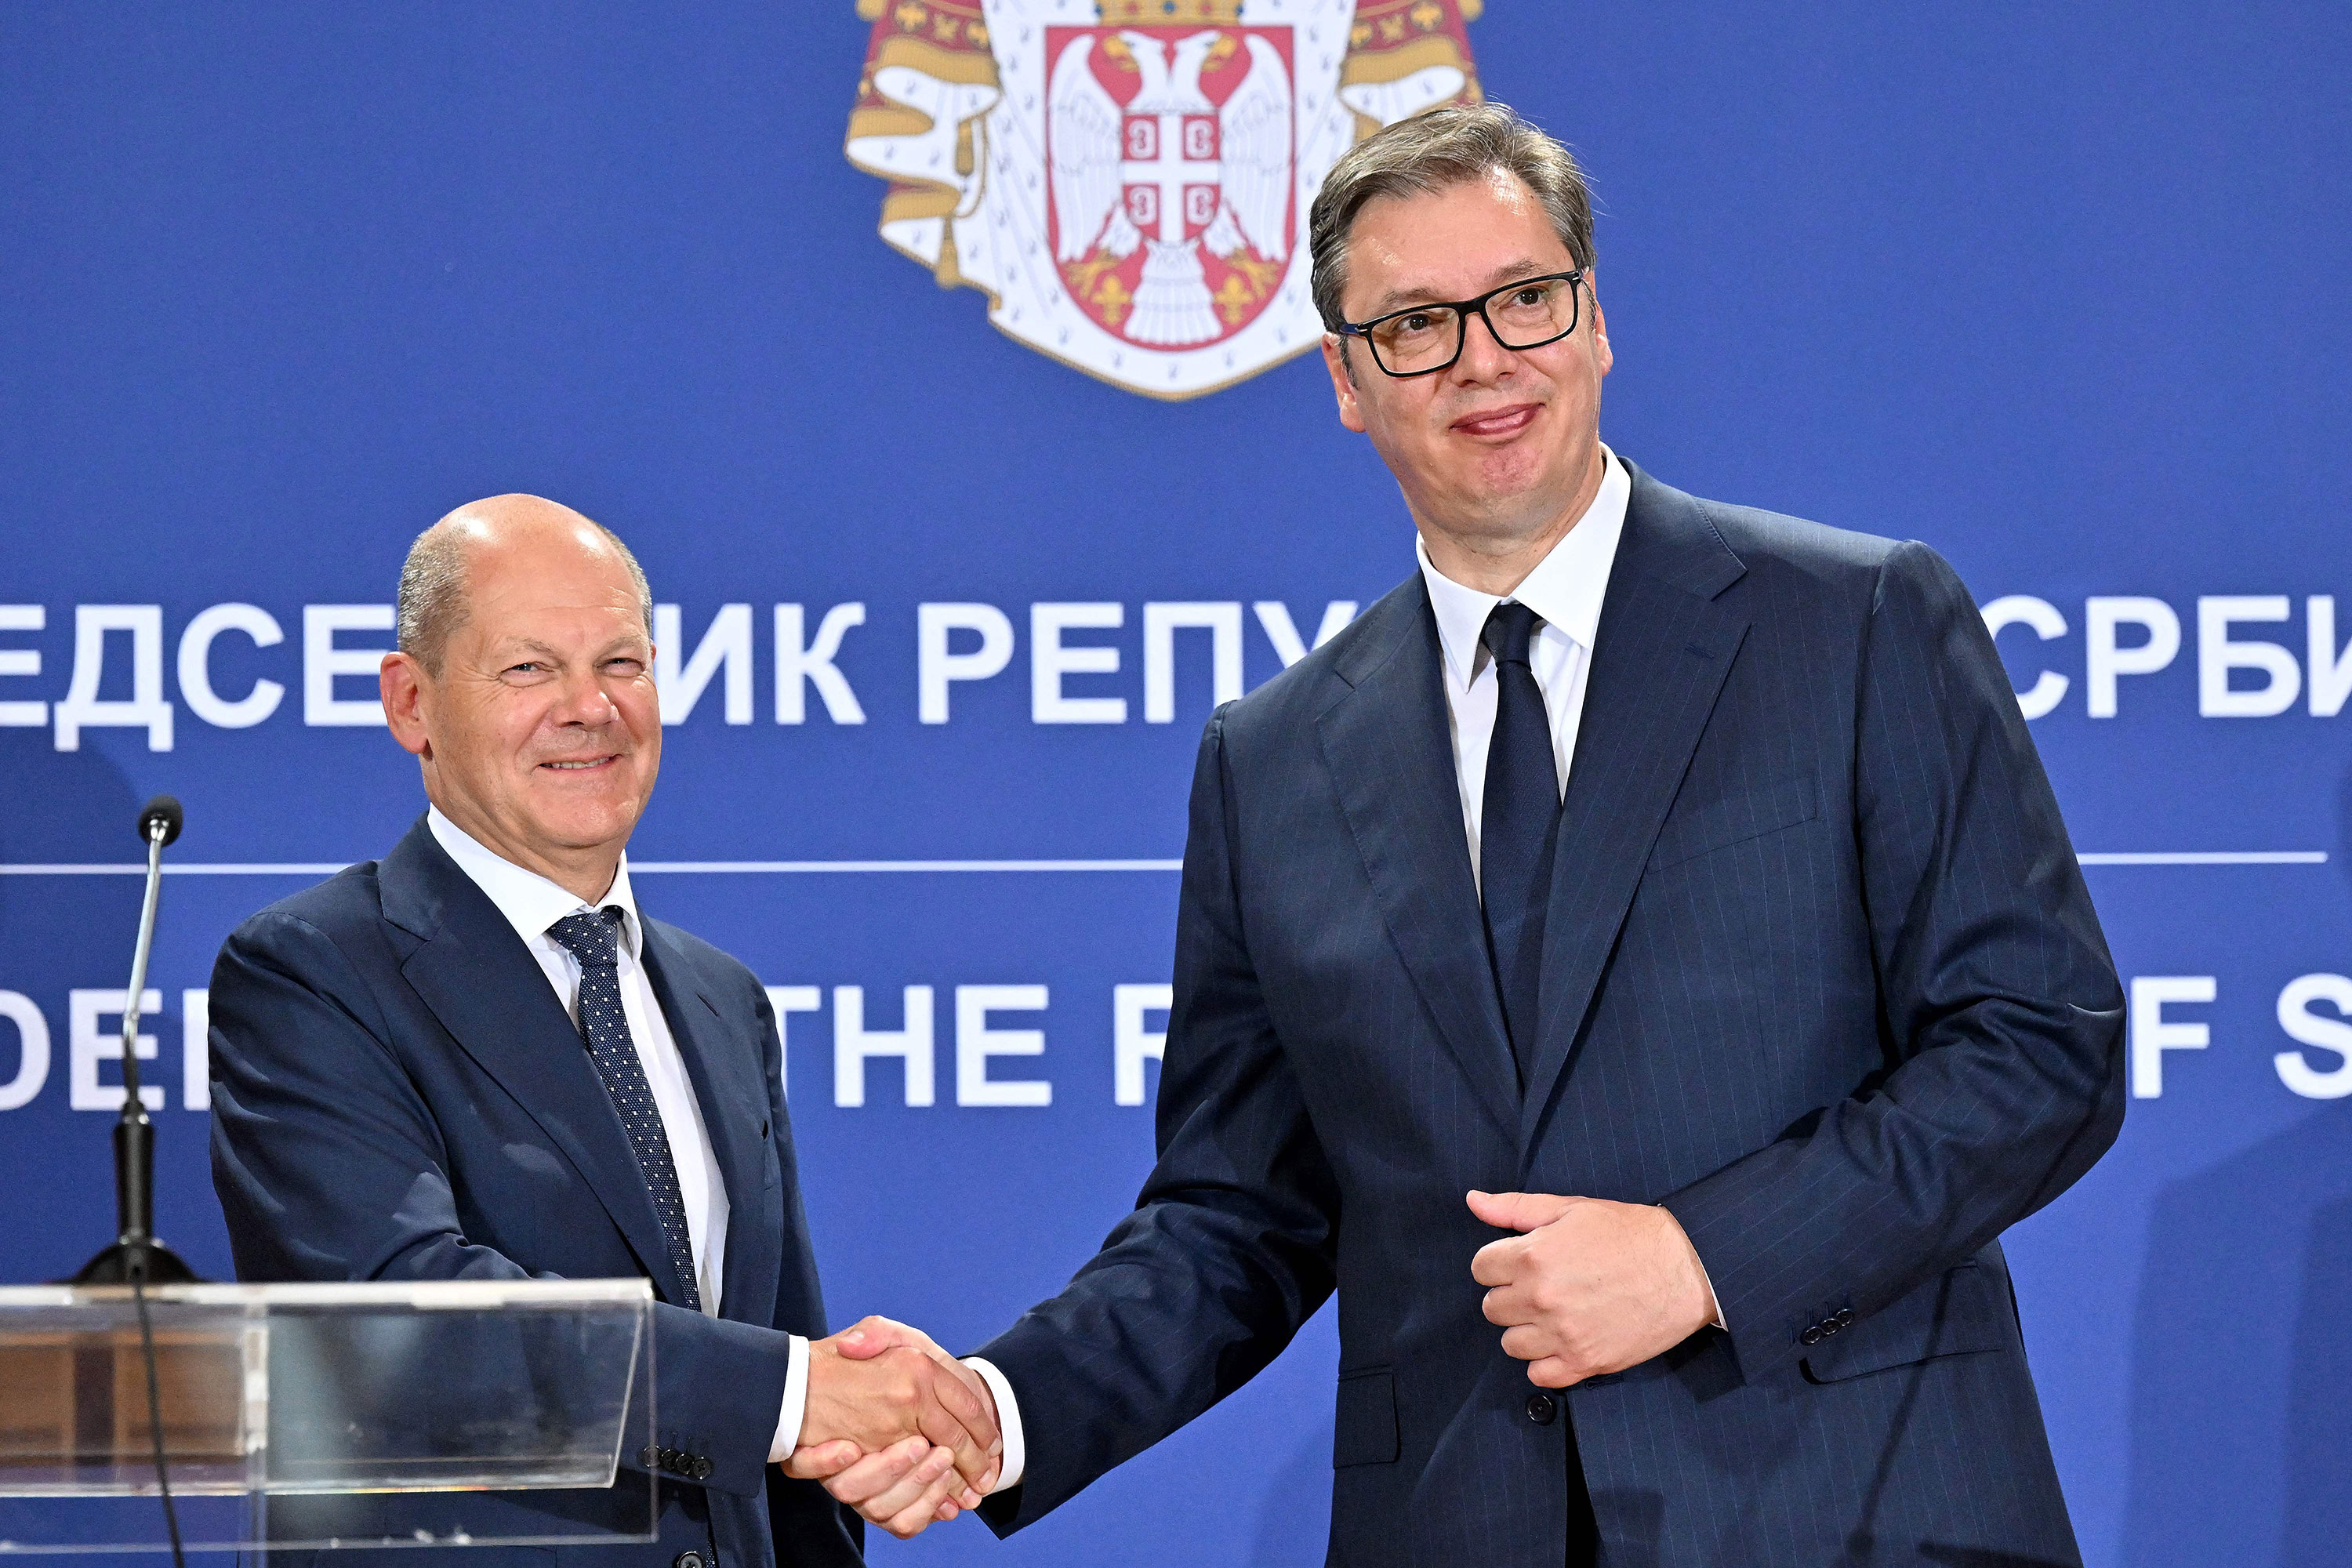 German Chancellor Olaf Scholz, left, shakes hands with Serbian President Aleksandar Vucic after a joint press conference in Belgrade, Serbia, on Friday.